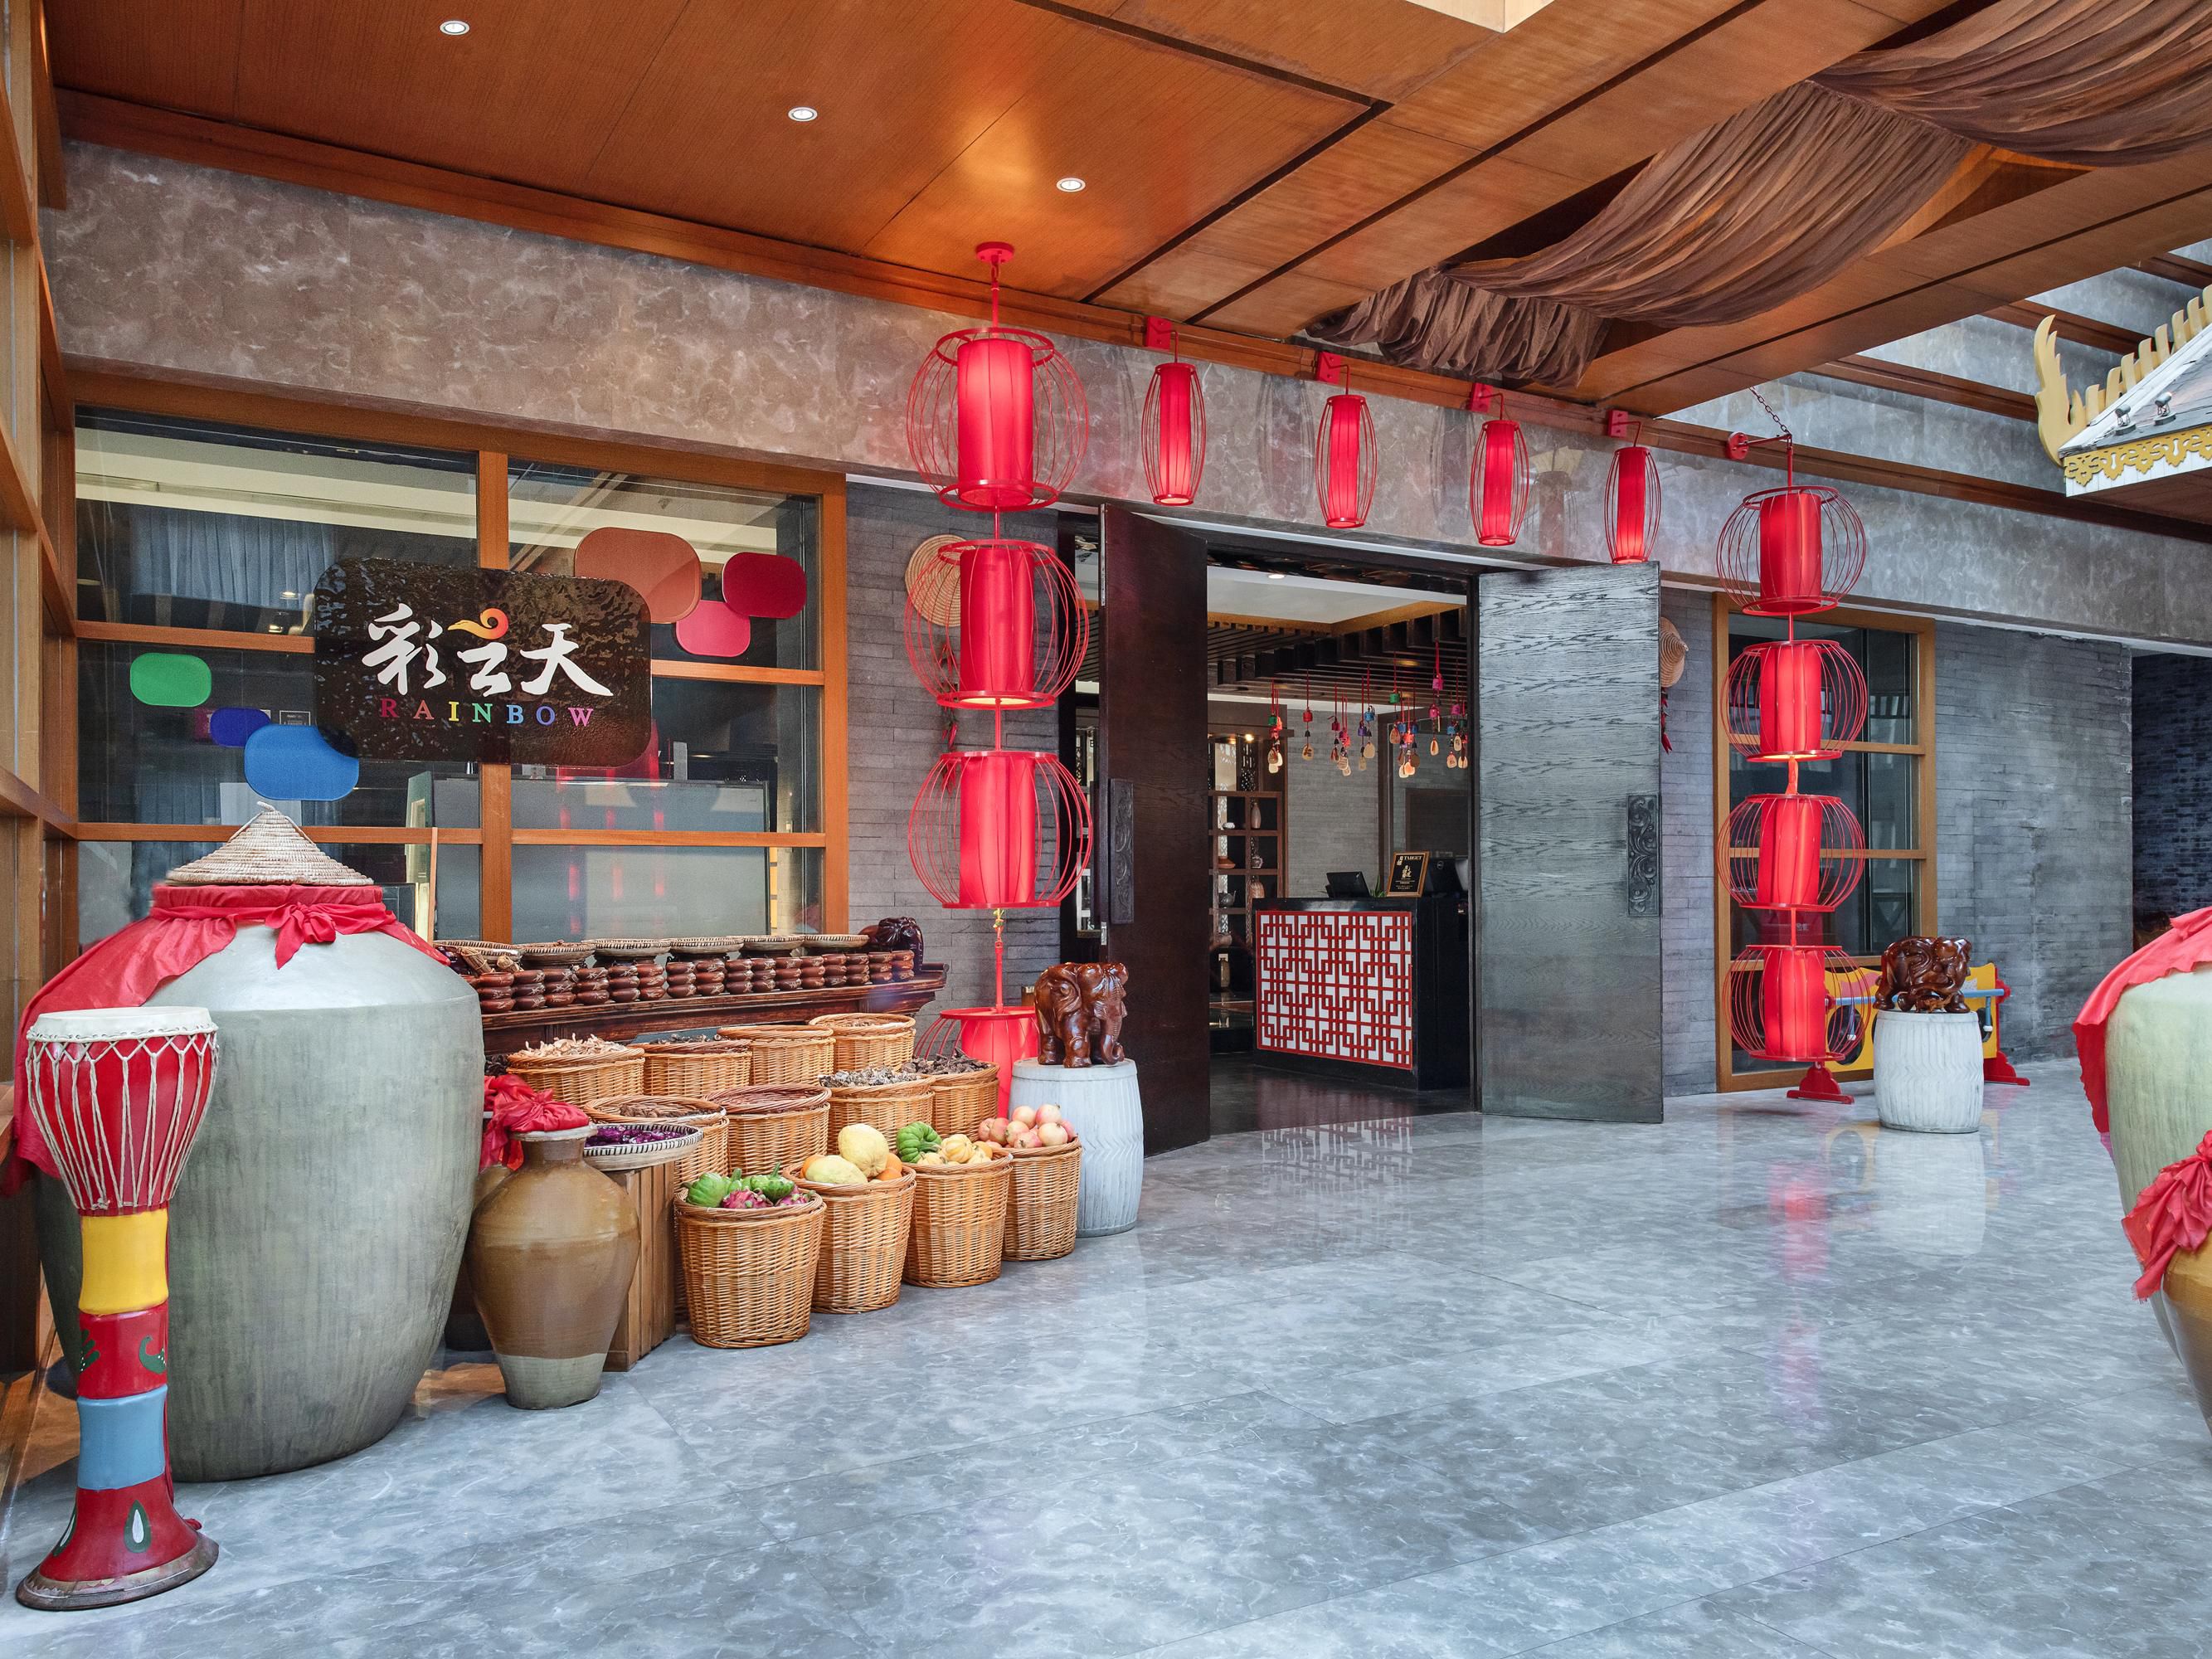 This restaurant offers a whole range of flavors from Yunnan which is famous for dishes prepared from very fresh ingredients and wild mushrooms, from healthy to spicy. The decor with Yunnan cultural bricks, paintings and service staff in beautiful Yunnan costumes will bring you an authentic Yunnan taste.